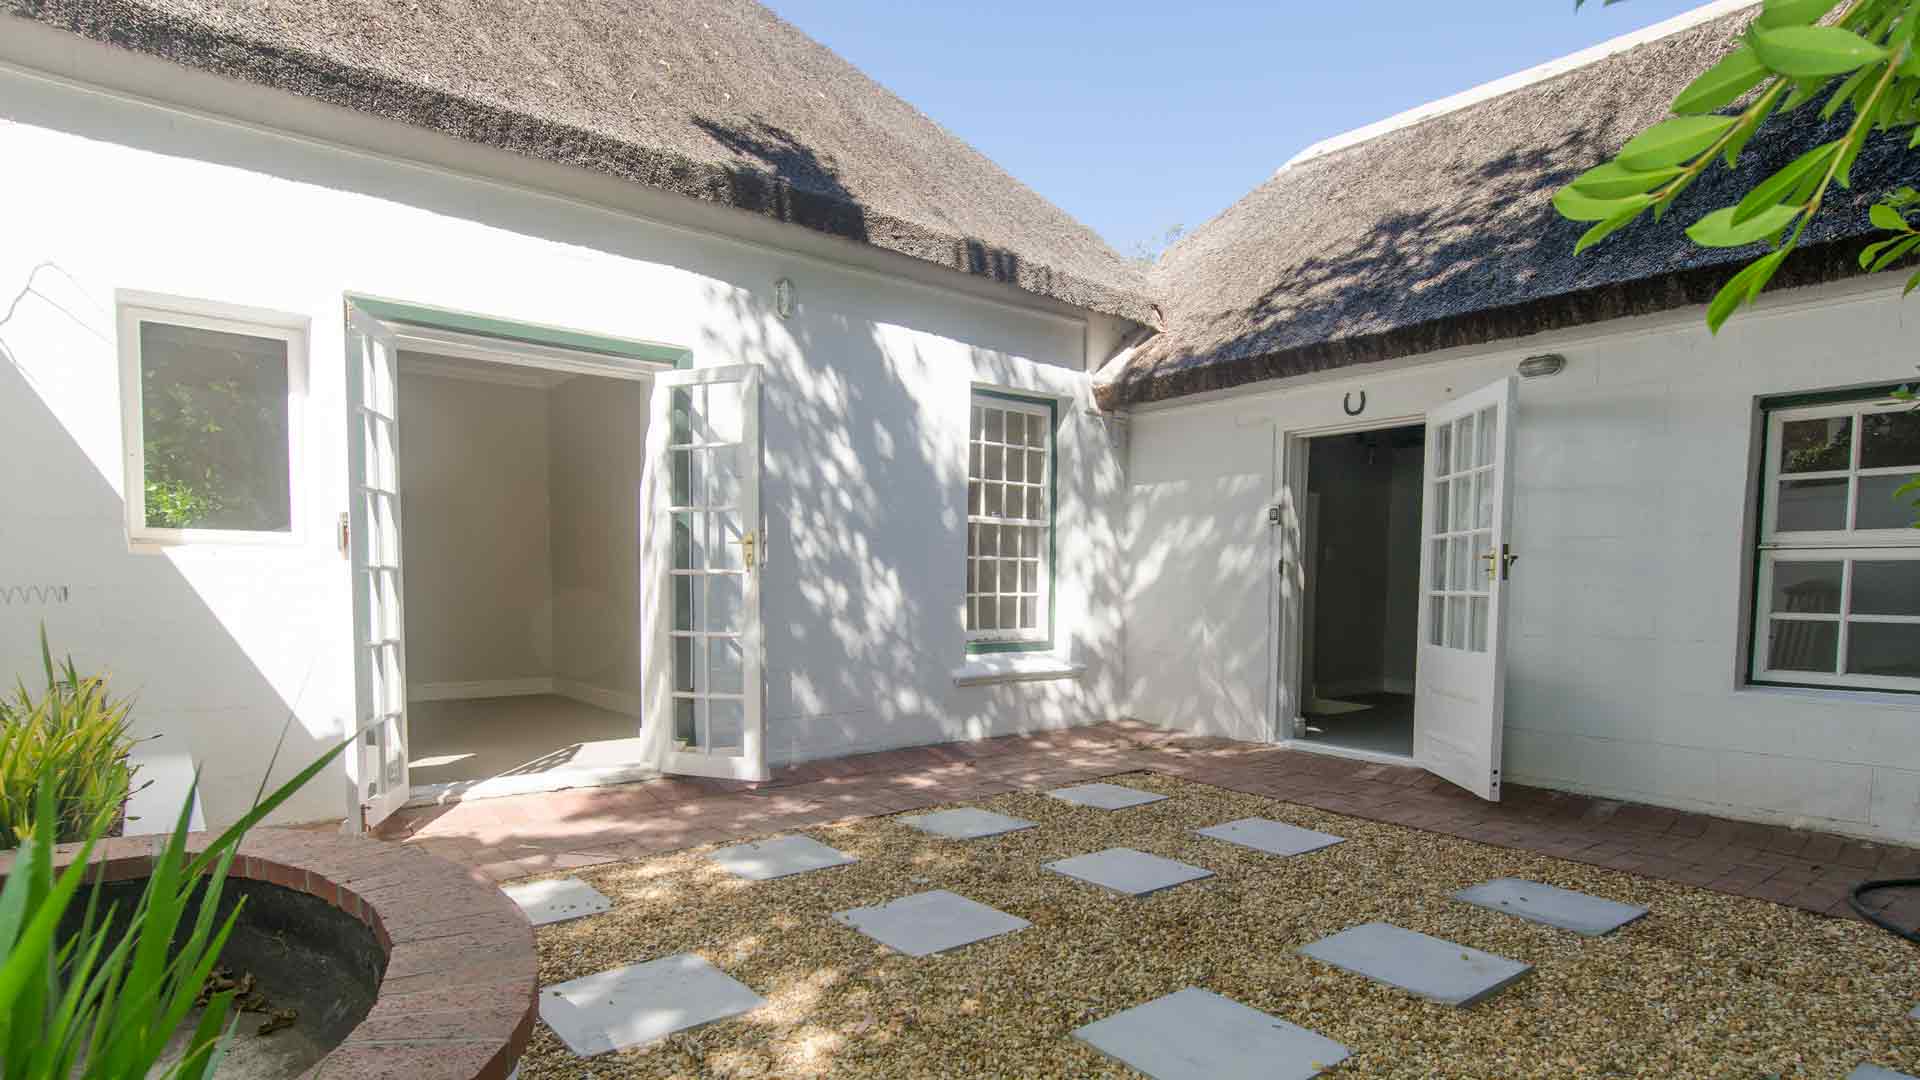 Charming Thatch Cottage in Gated Complex – great value + no transfer duty